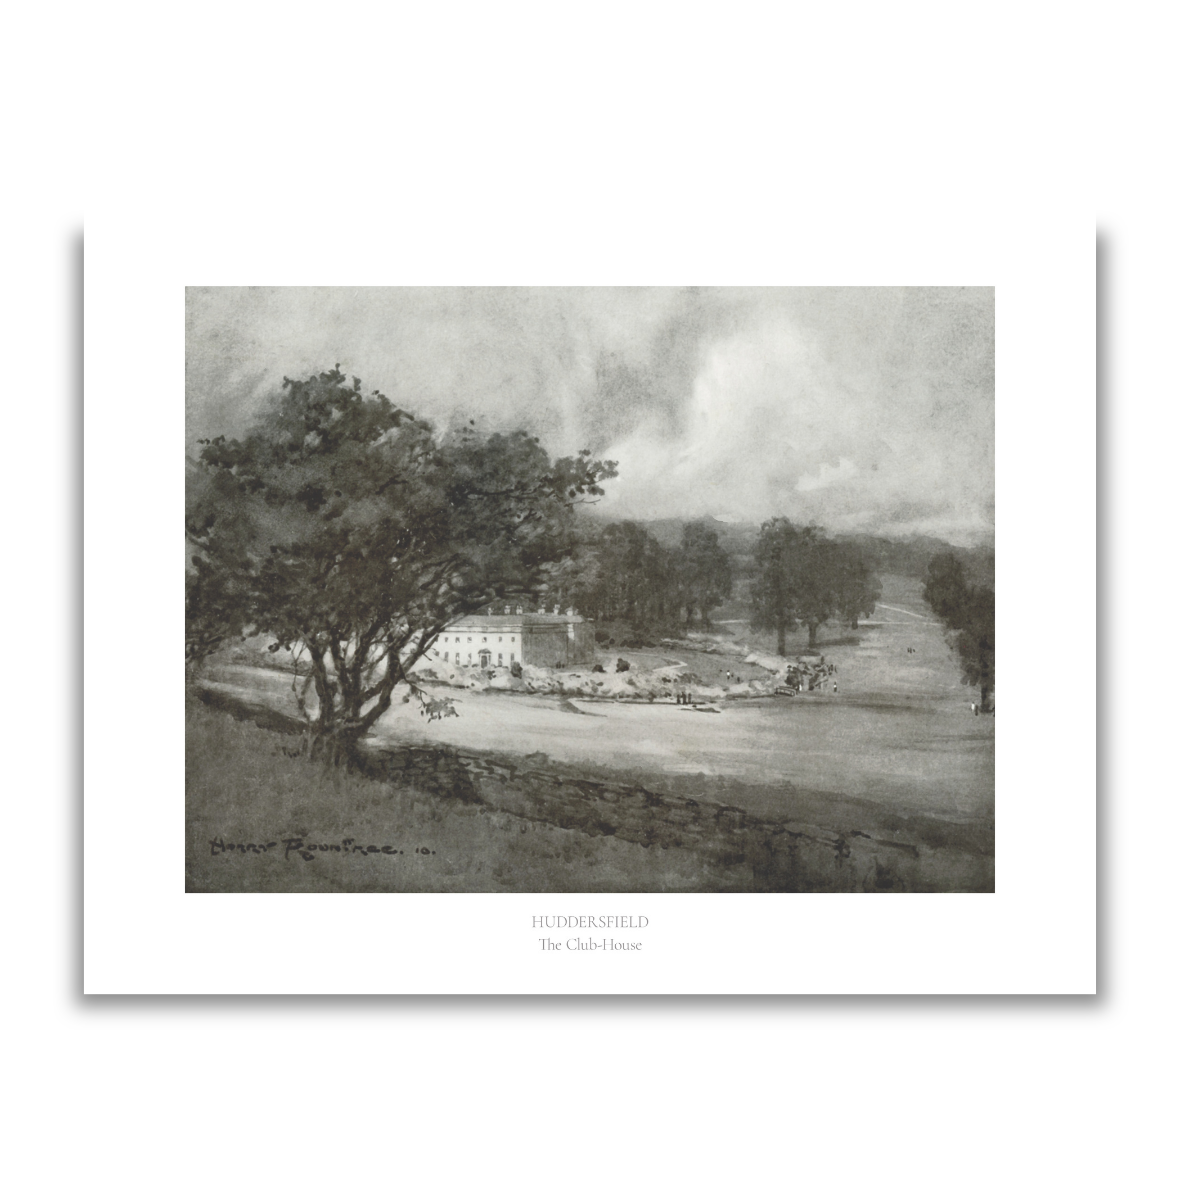 Huddersfield Golf Club print with text by Harry Rountree